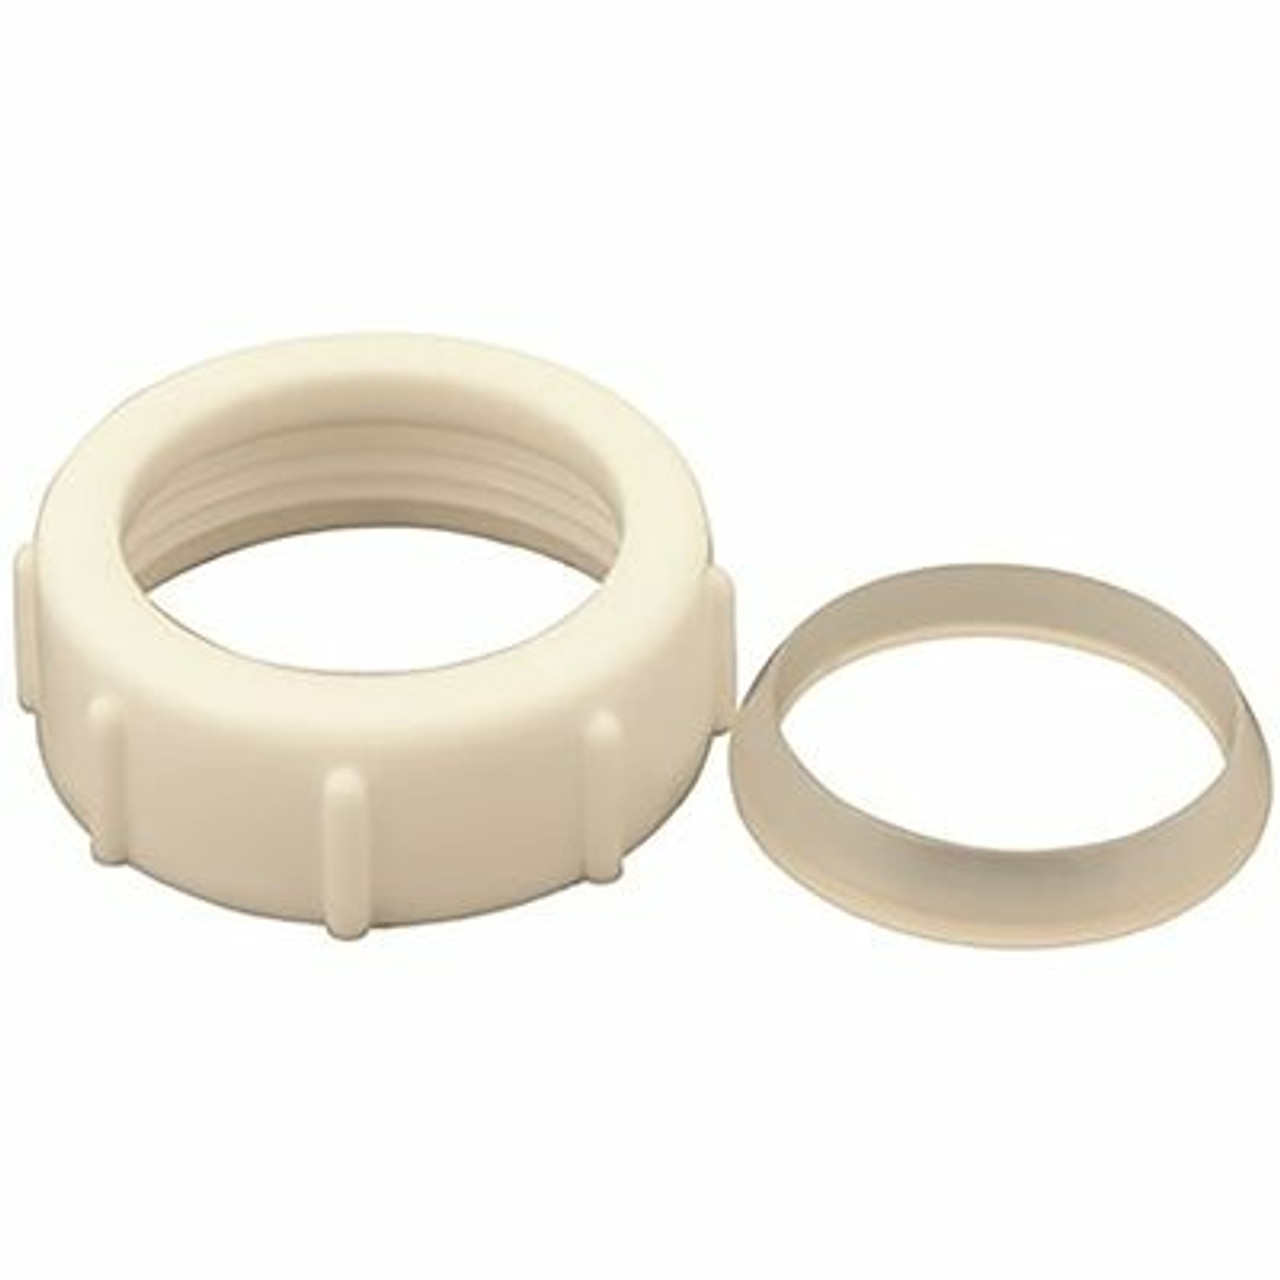 Durapro 1-1/4 In. Pvc Slip-Joint Nut And Washer